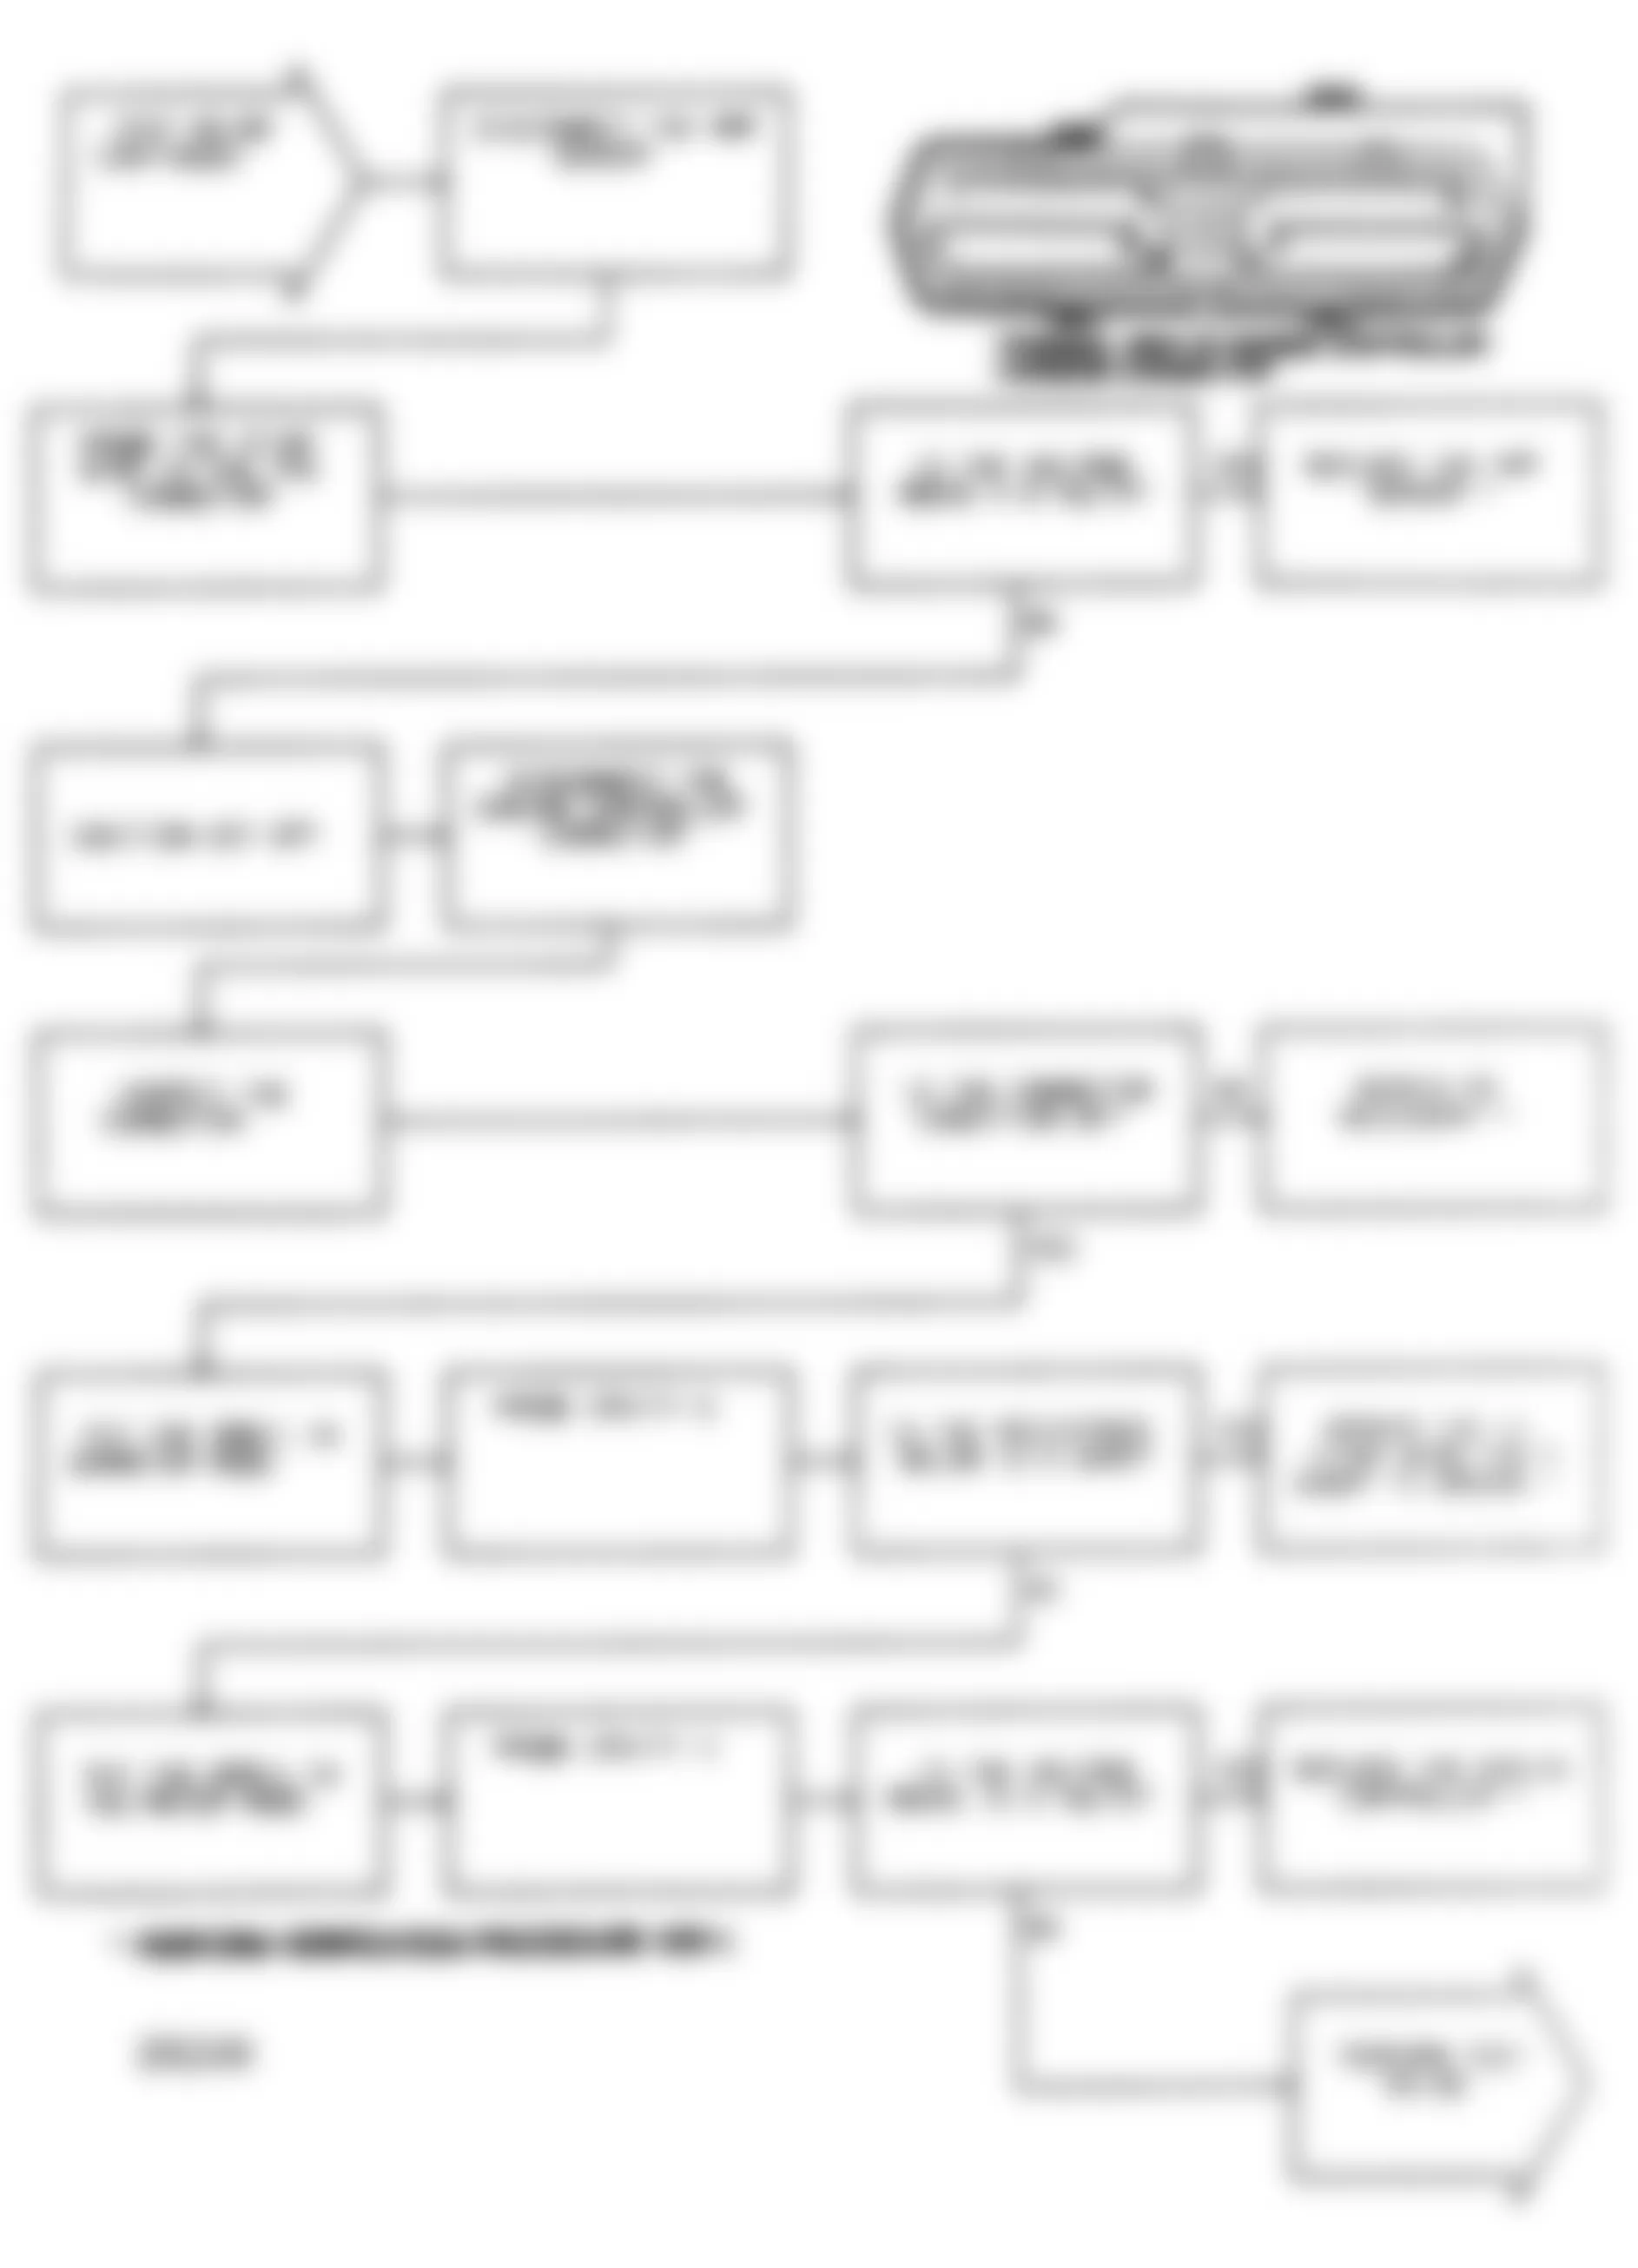 Chrysler LeBaron GTC 1991 - Component Locations -  Test NS-8A, Diagnostic Flow Chart (3 of 3)